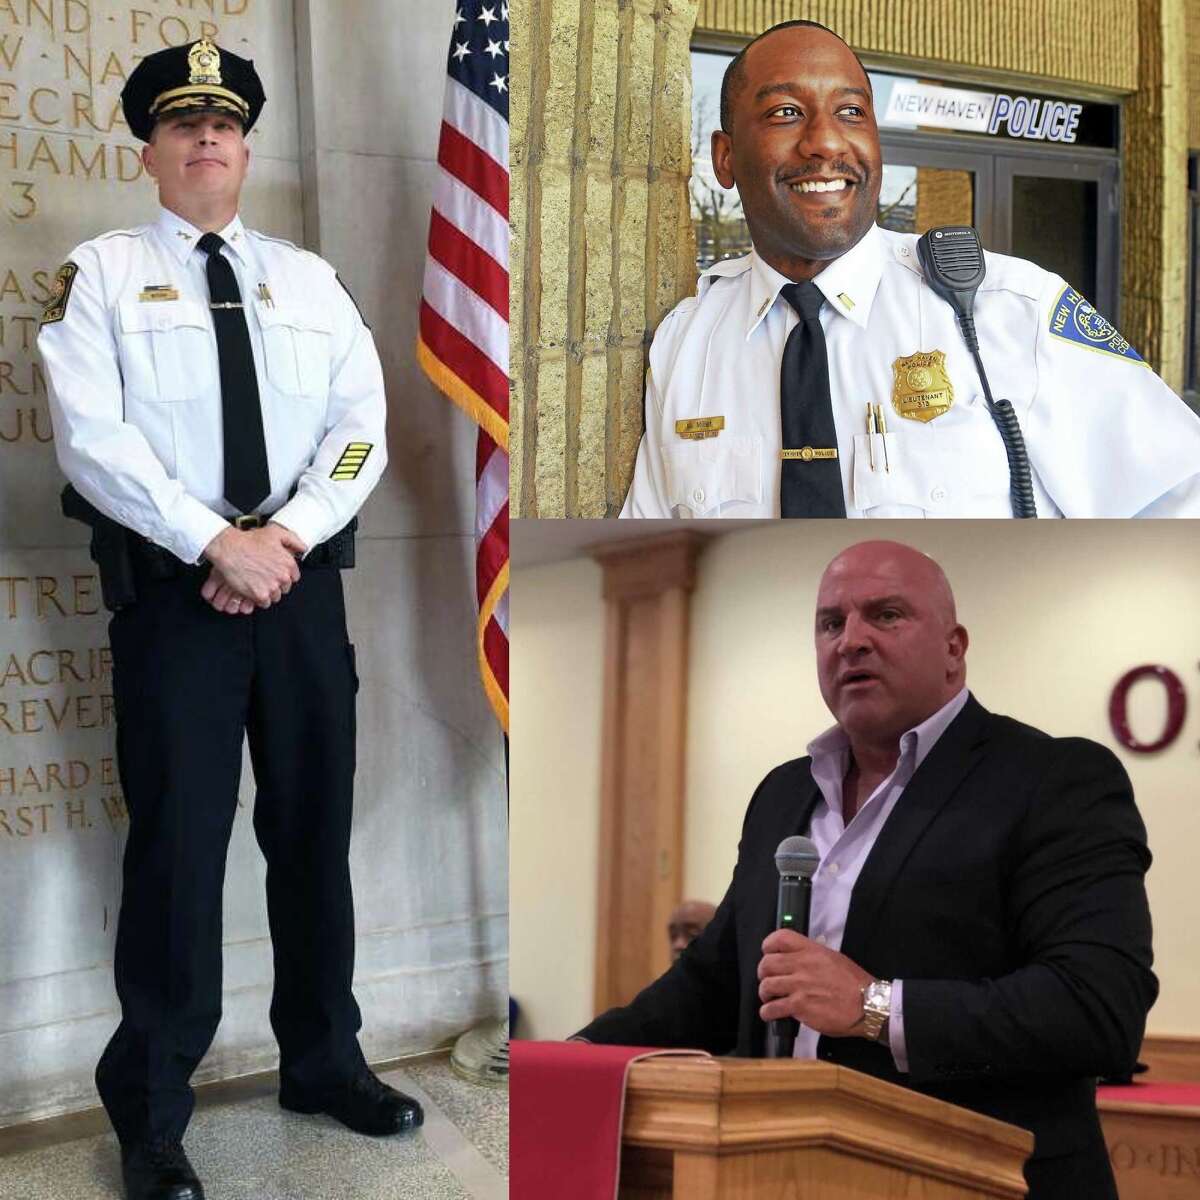 Three candidates for Hamden police chief (clockwise from left): Acting Chief Tim Wydra, Makiem Miller and John Velleca.